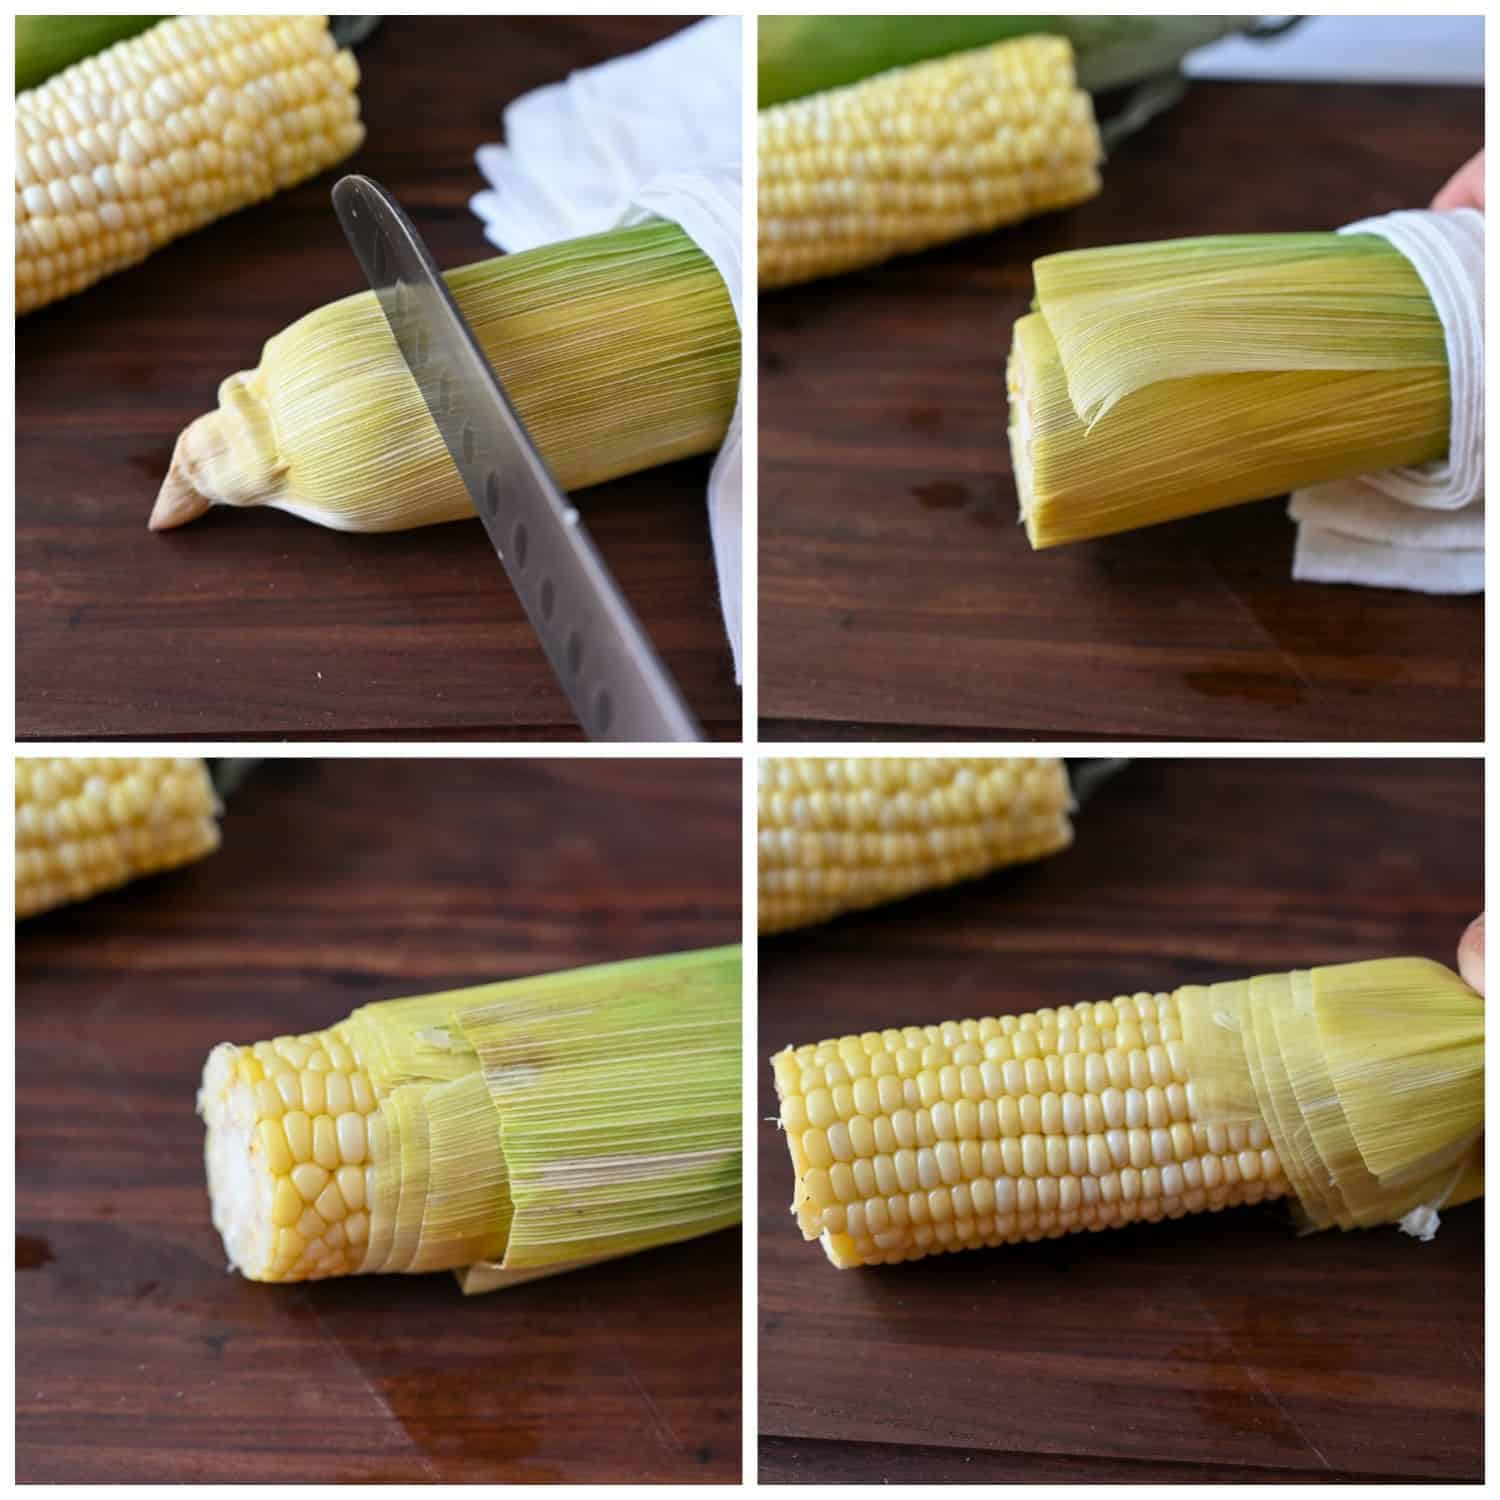 Four process photos. First one microwaved corn on the cob with the end being chopped off with a knife. Second one, a white towel holding the end and gently squeezing out the corn from the husk. Thurd one, the corn is halfway out of the husk. Fourth one, the cob is all the way out of the husks.